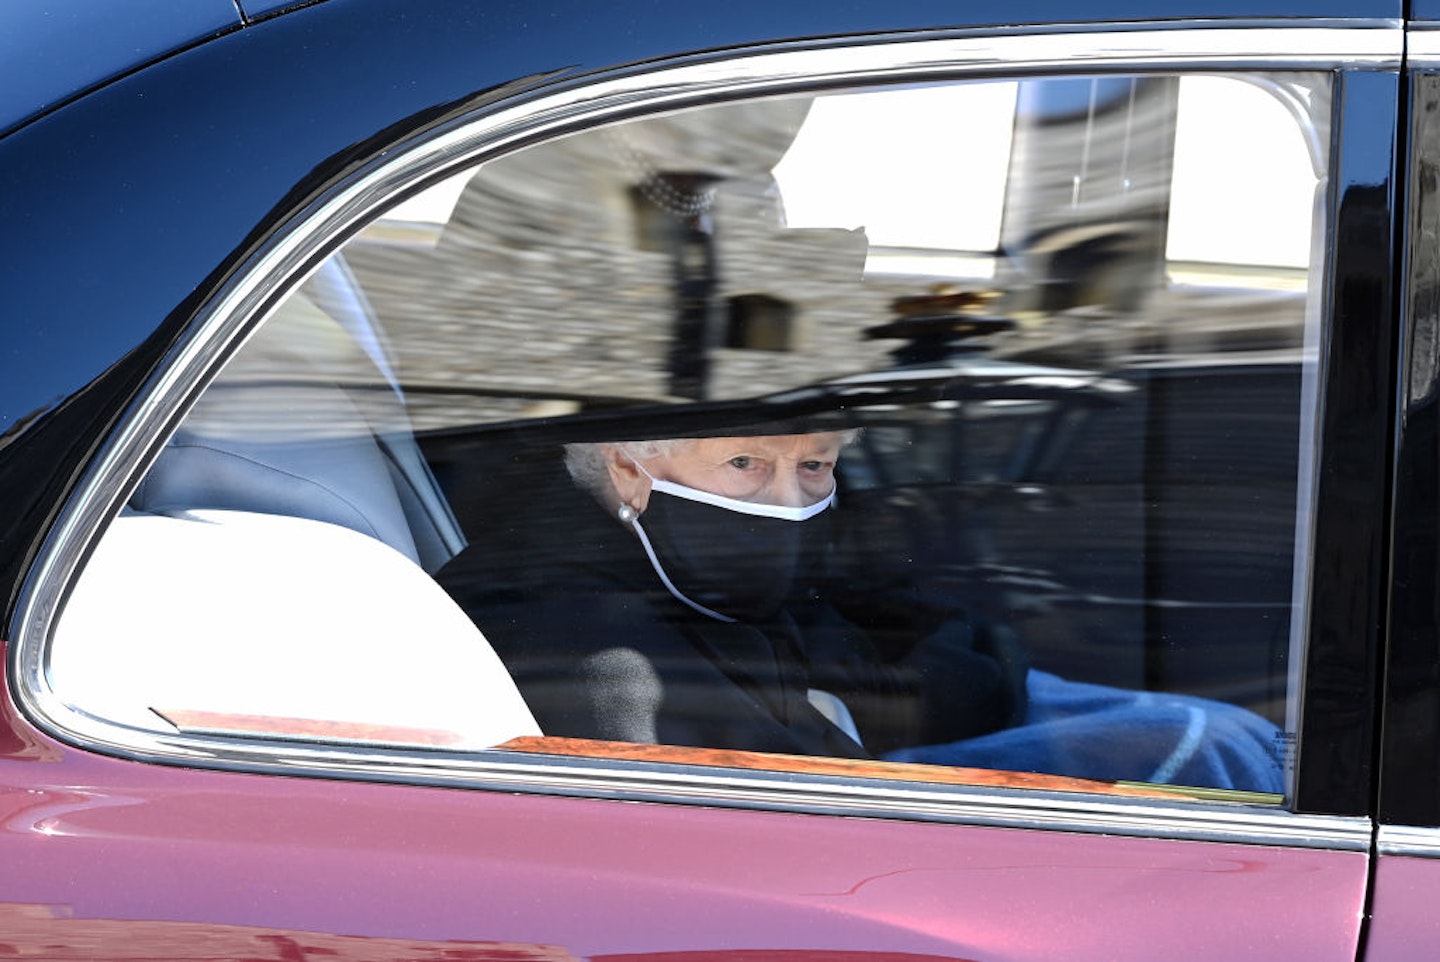 The Queen arrives at Prince Philip's funeral